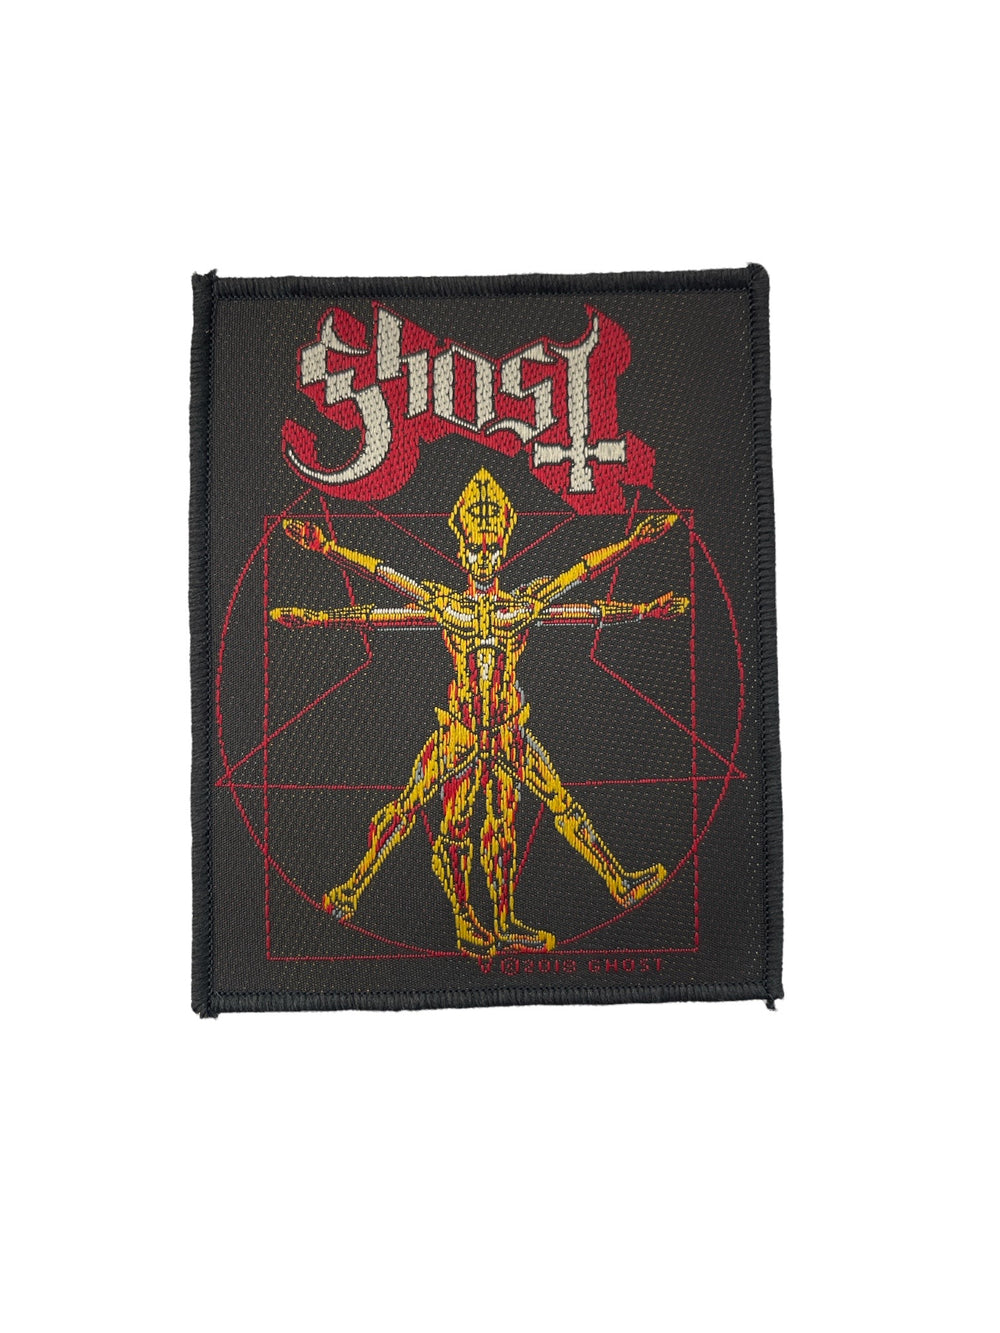 Ghost Standard Patch: The Vitruvian Ghost Official Woven Patch Brand New